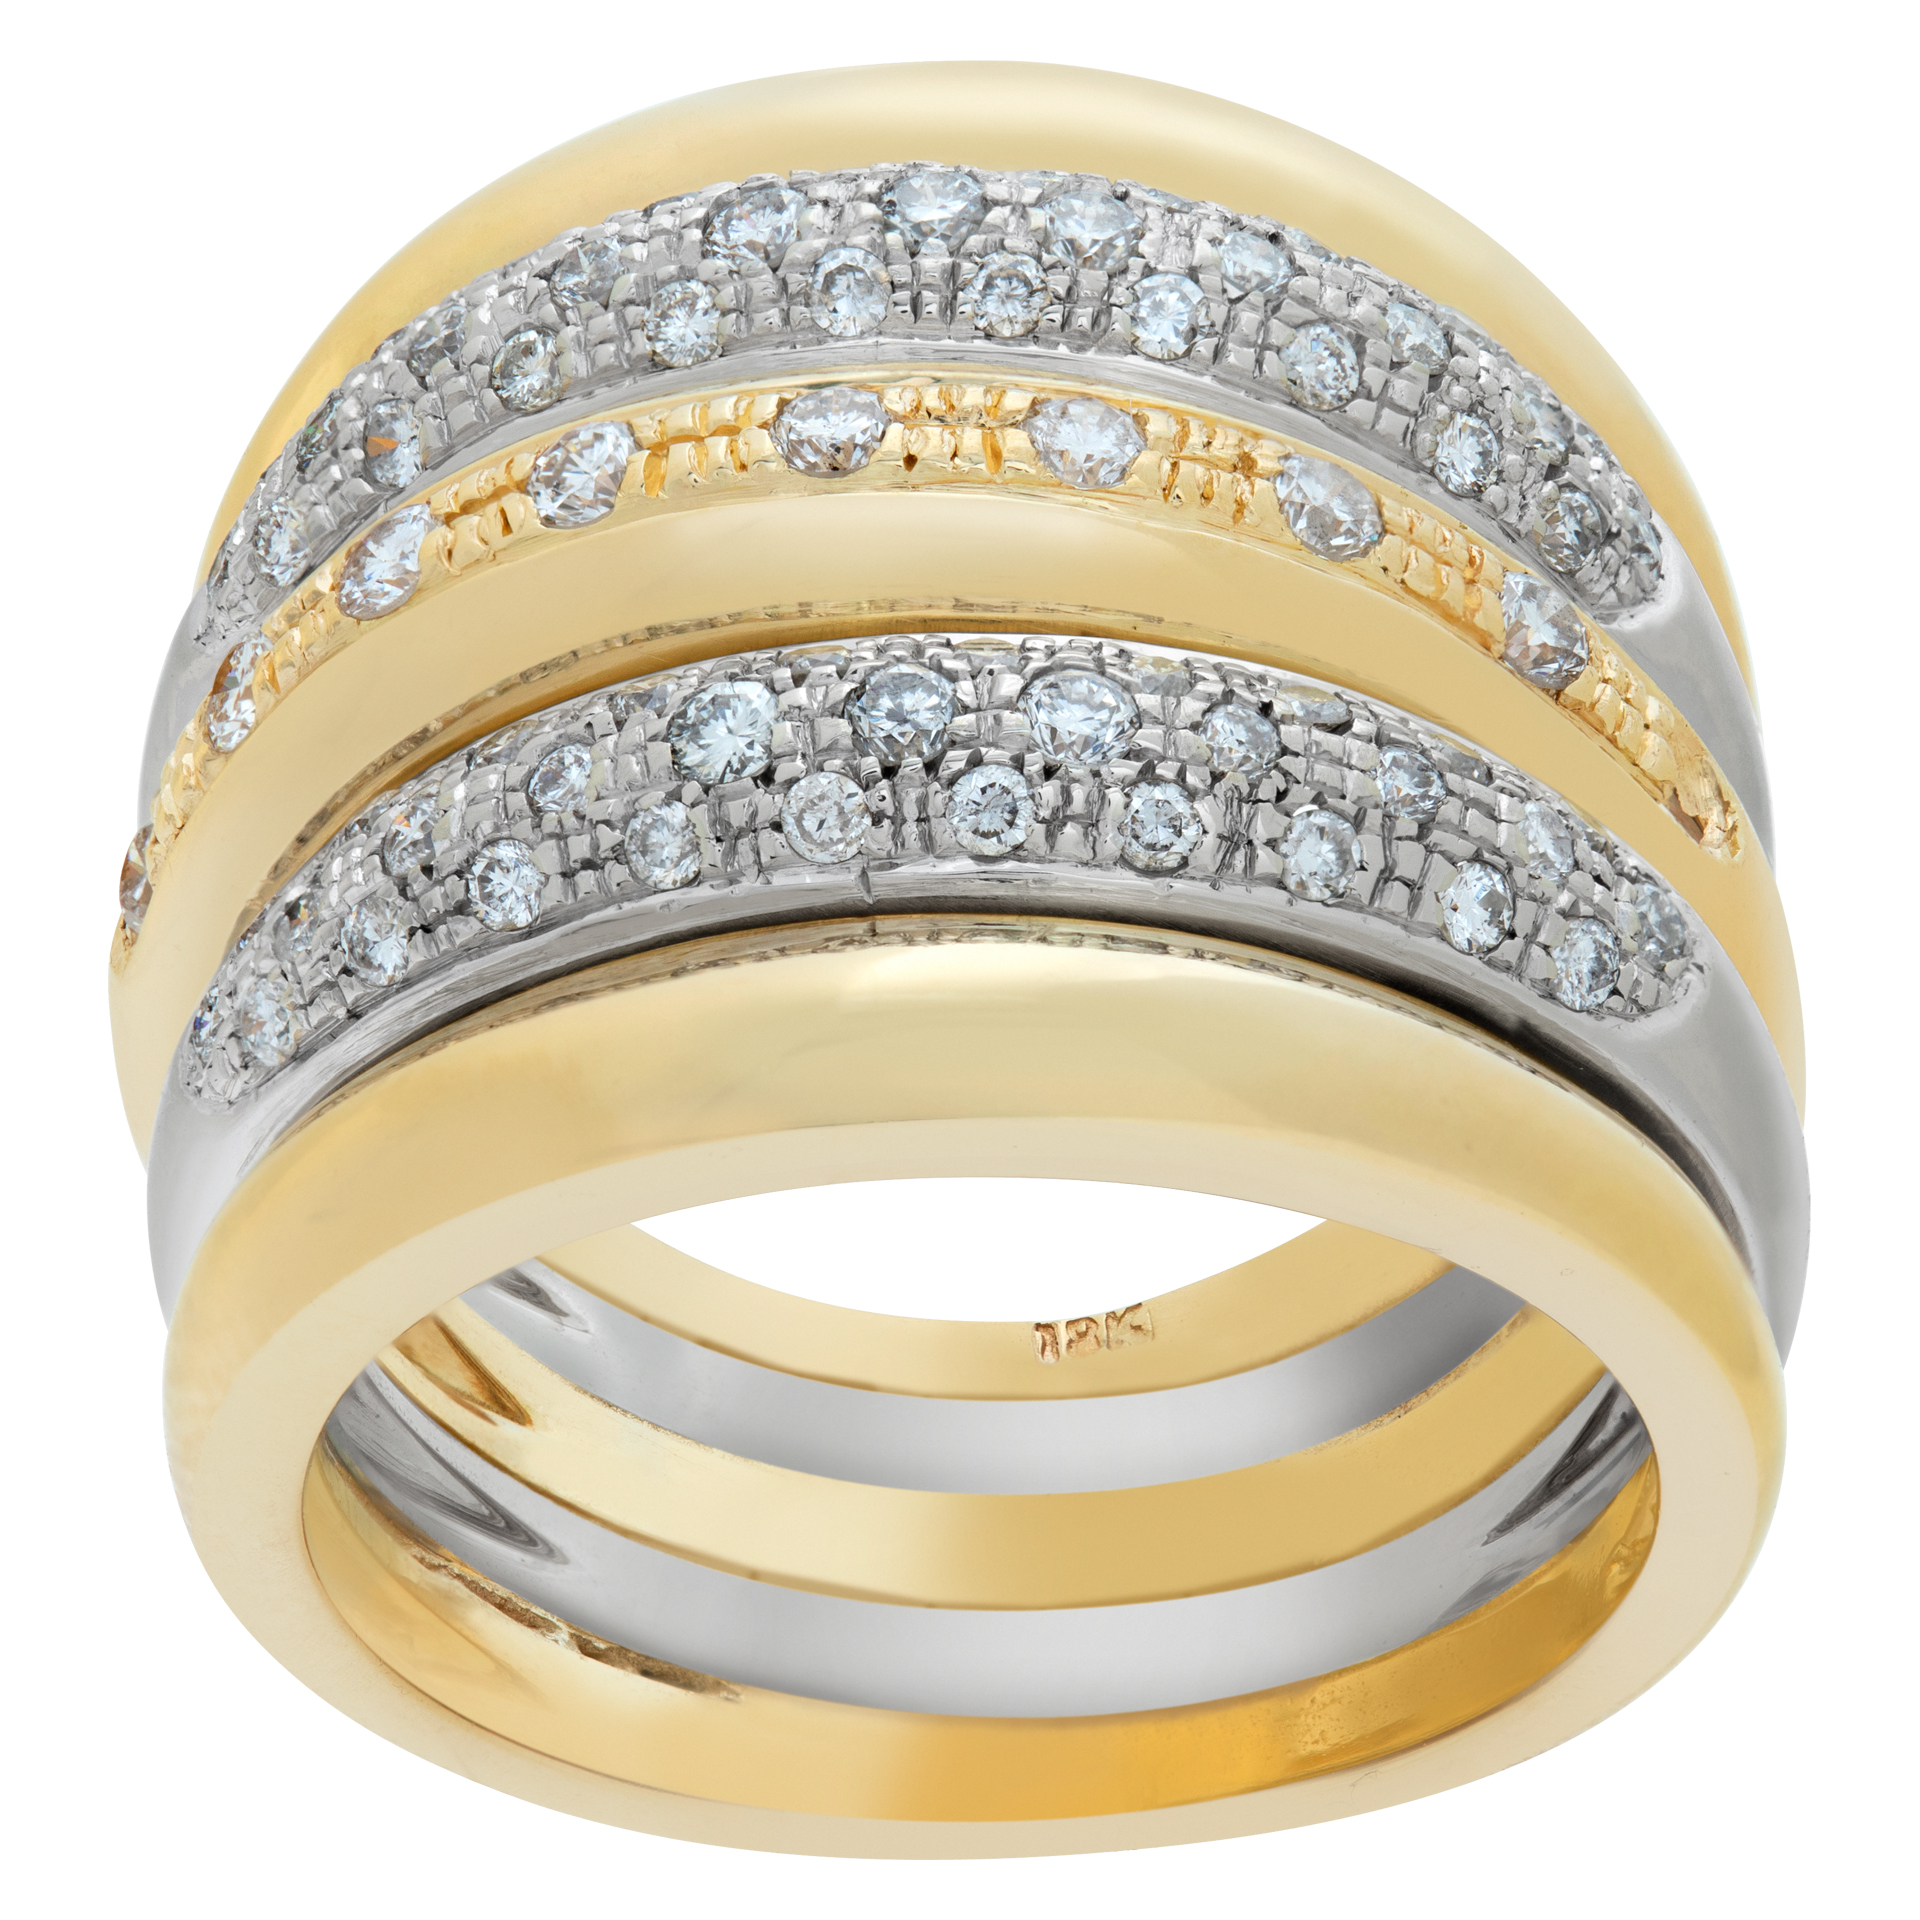 Wide diamonds ring in 18k white and yellow gold. Round brilliant cut diamonds total approx. weight: 1.00 carat,